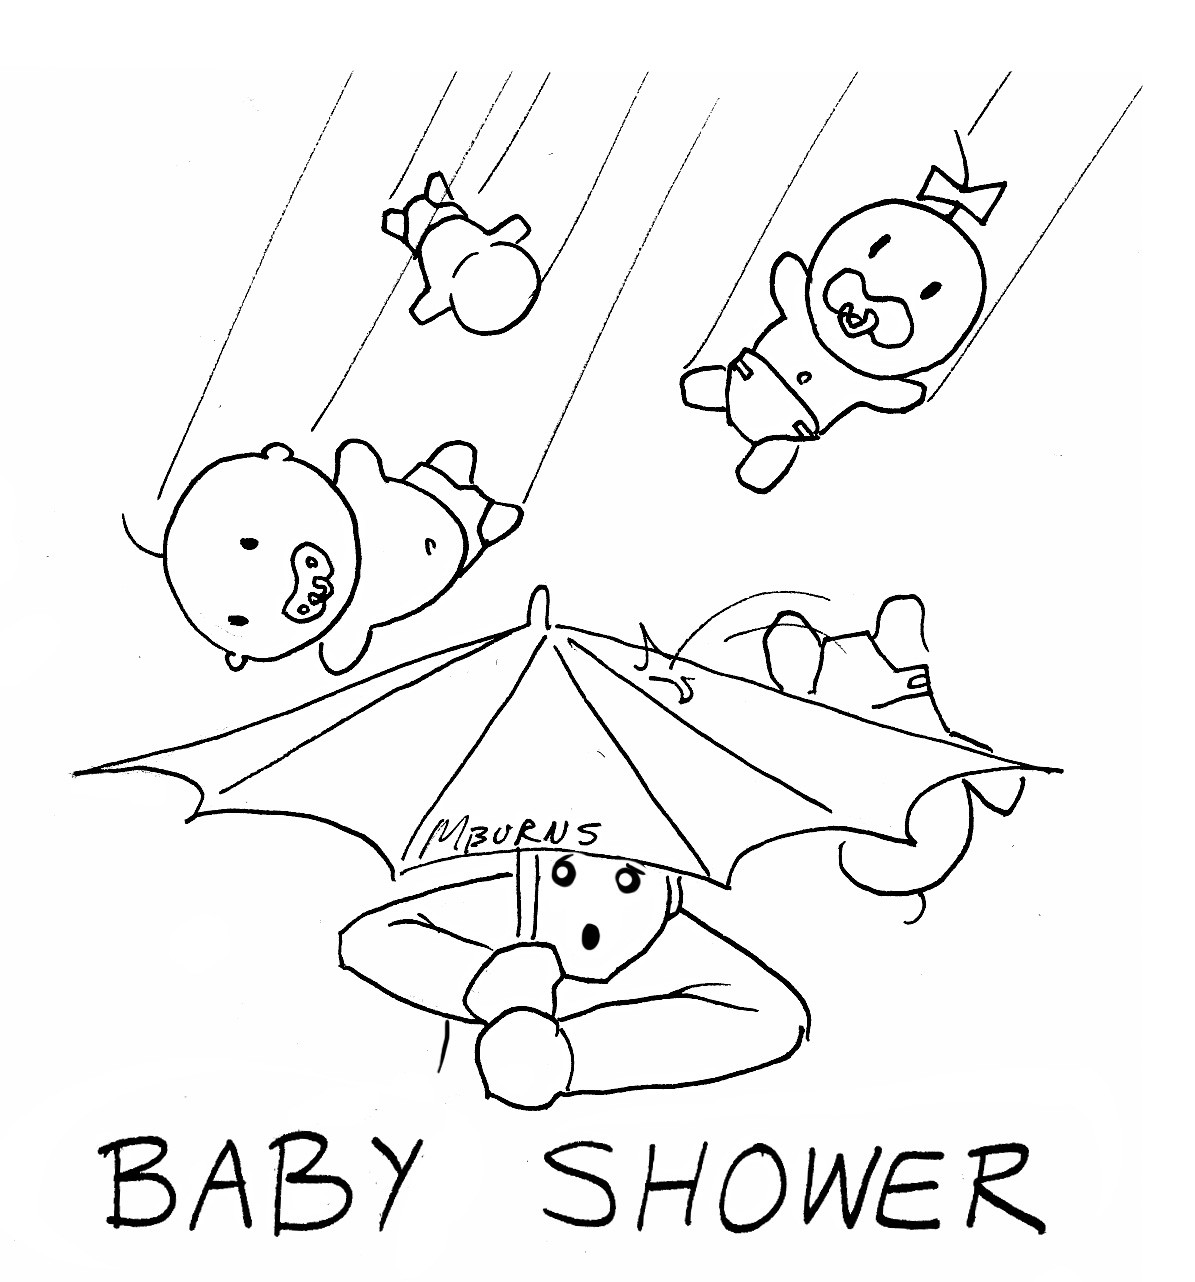 Baby Shower Coloring Page
 " ic Strip" by Mike Burns Baby Shower Teleport